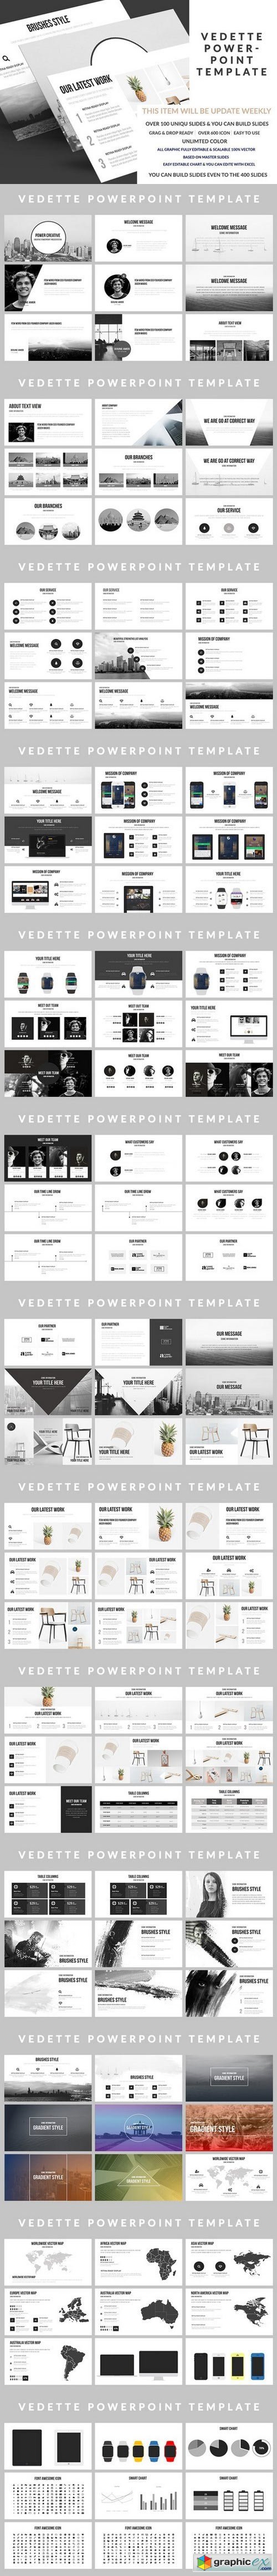 Vedette PowerPoint Template